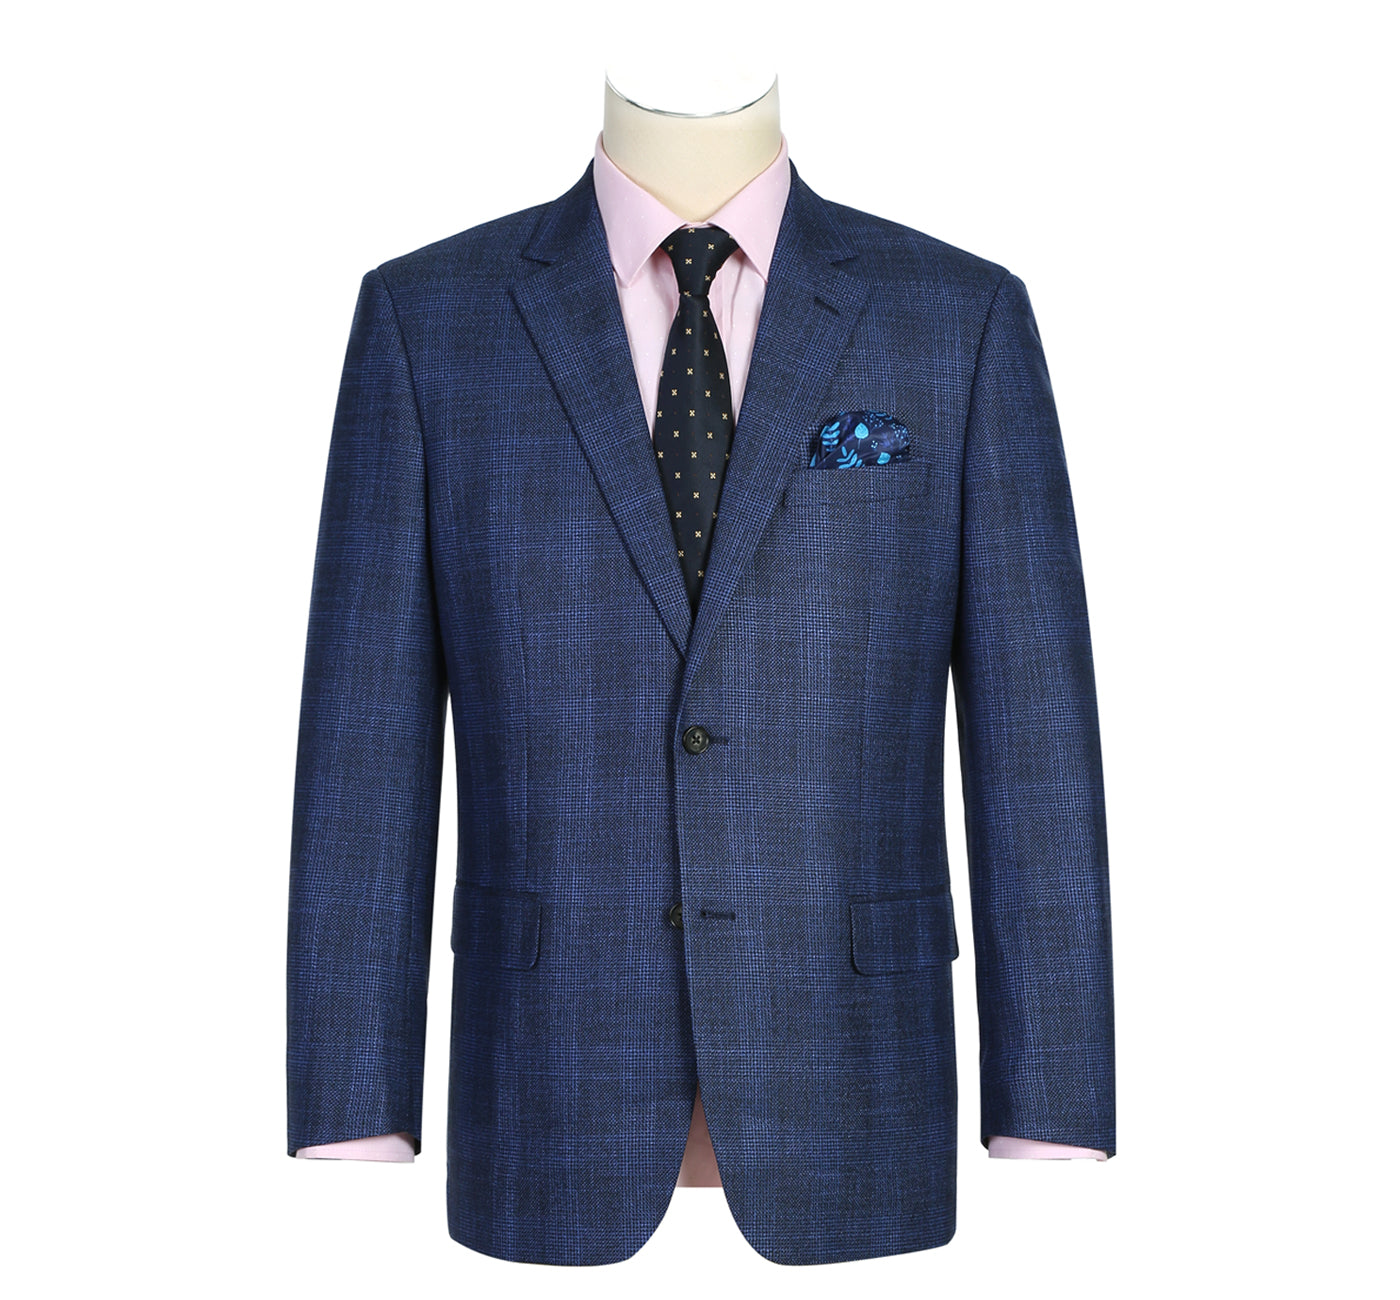 Men’s Classic Fit Single Breasted Two Button Navy Big-Plaid Suit Jacket Blazer 1